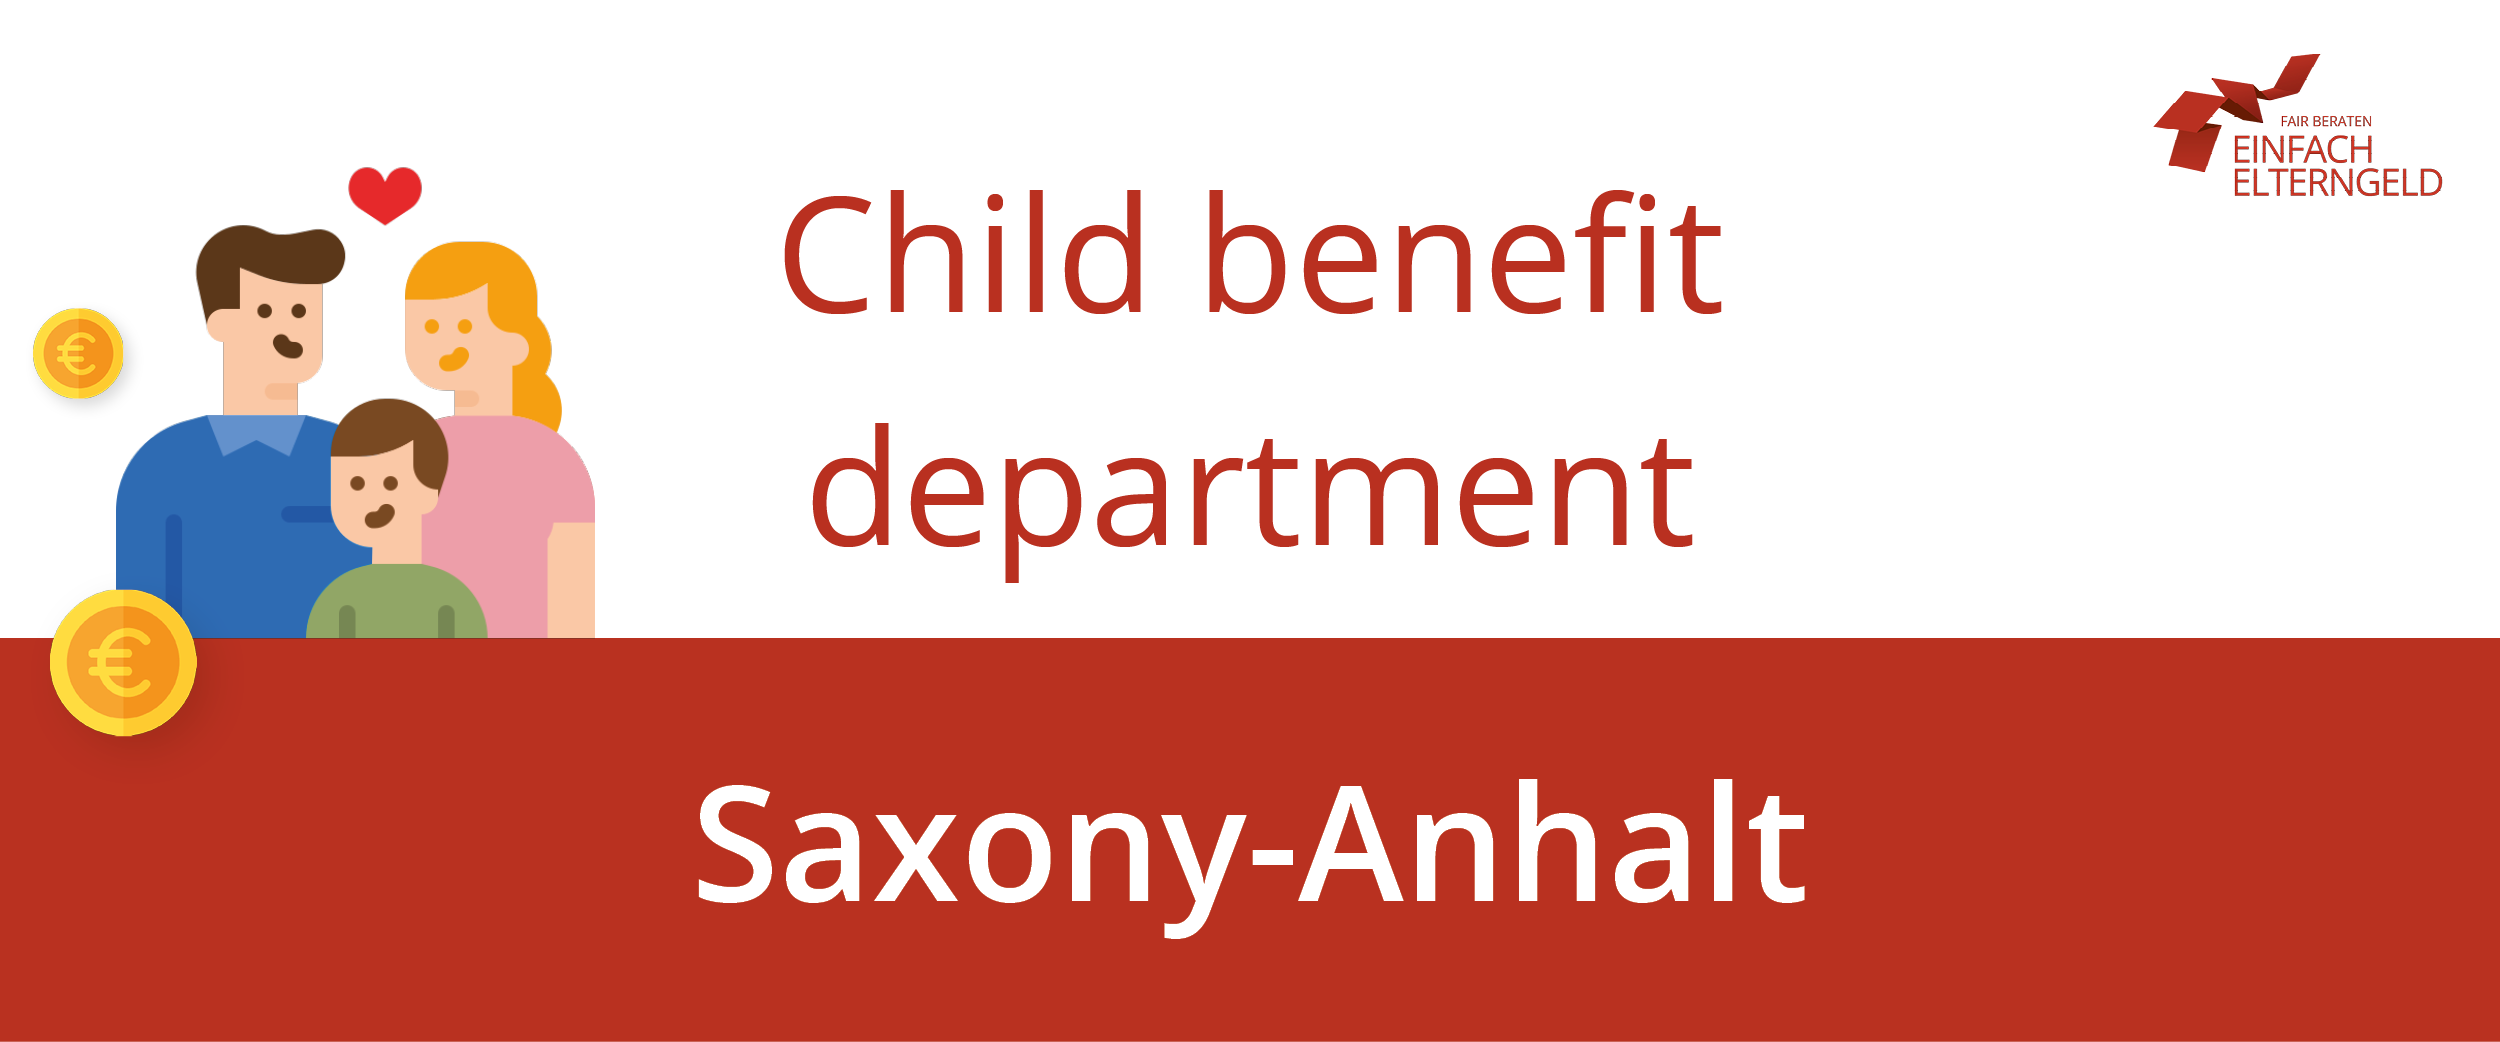 We introduce you to the child benefit department Saxony-Anhalt.